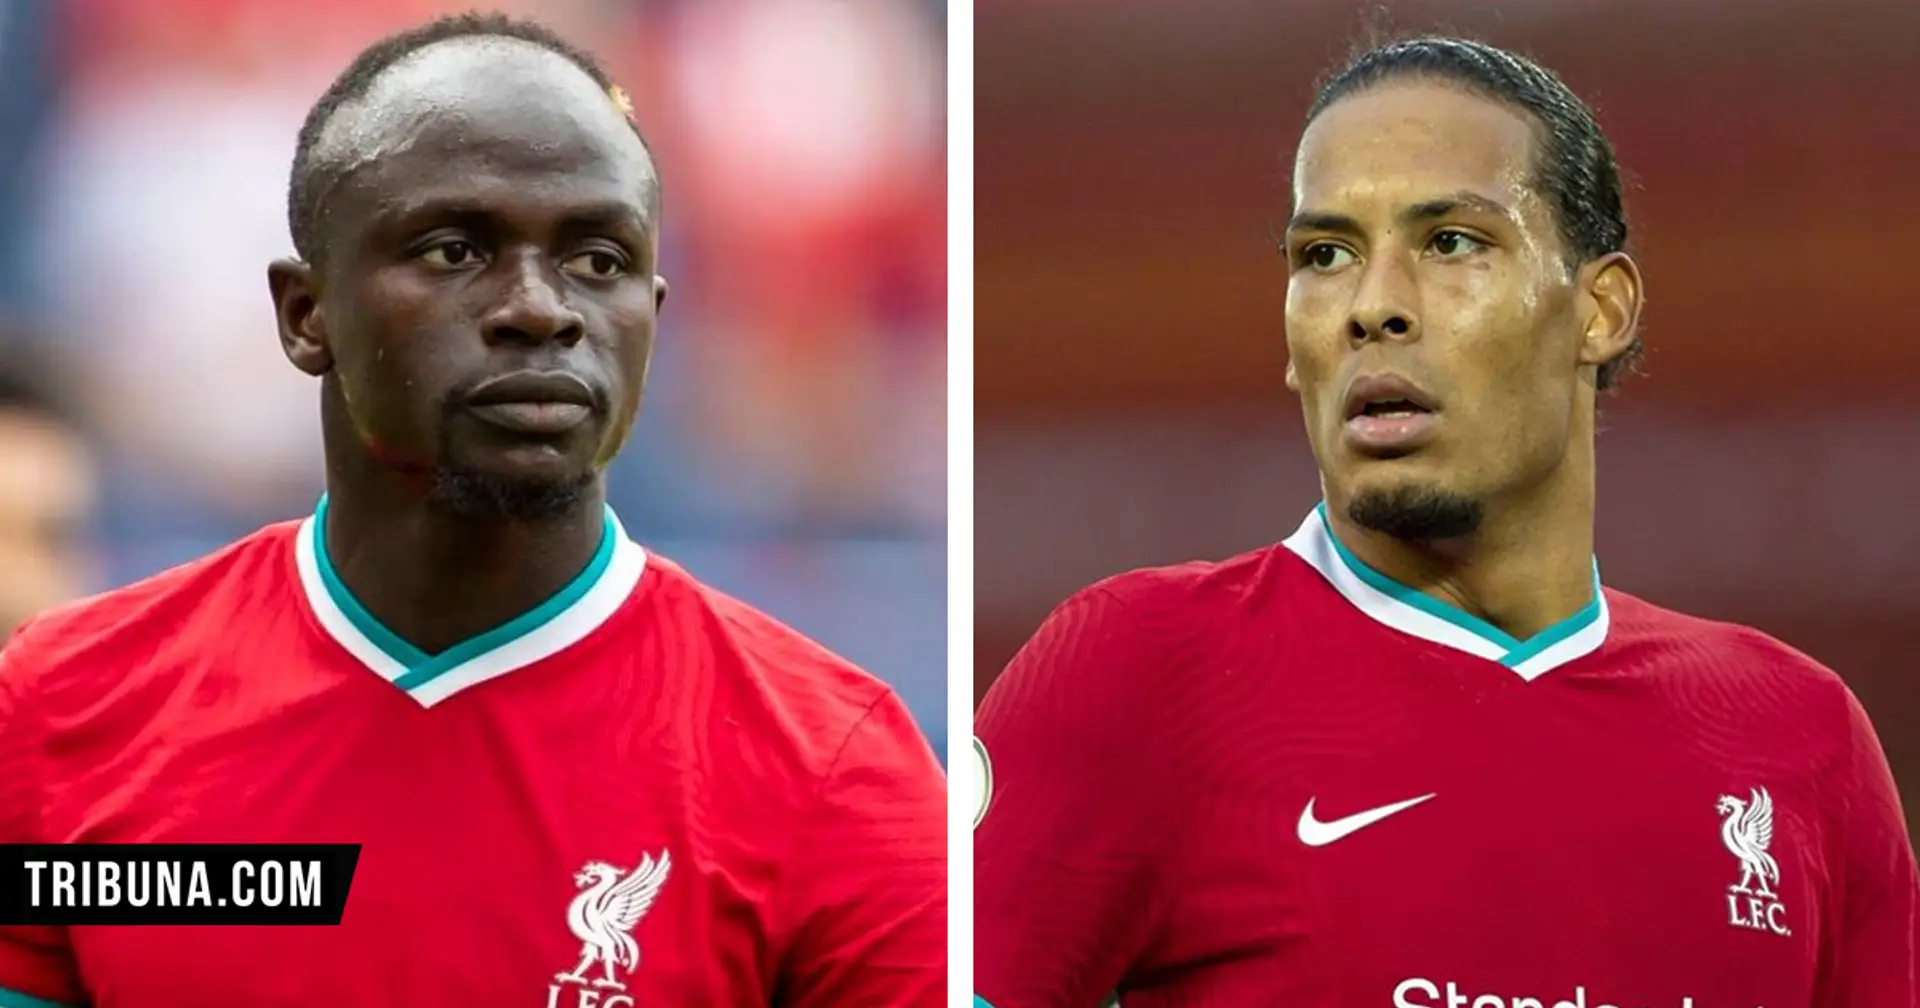 Mane, Van Dijk and 11 more Liverpool players whose contracts could expire in next 2 years